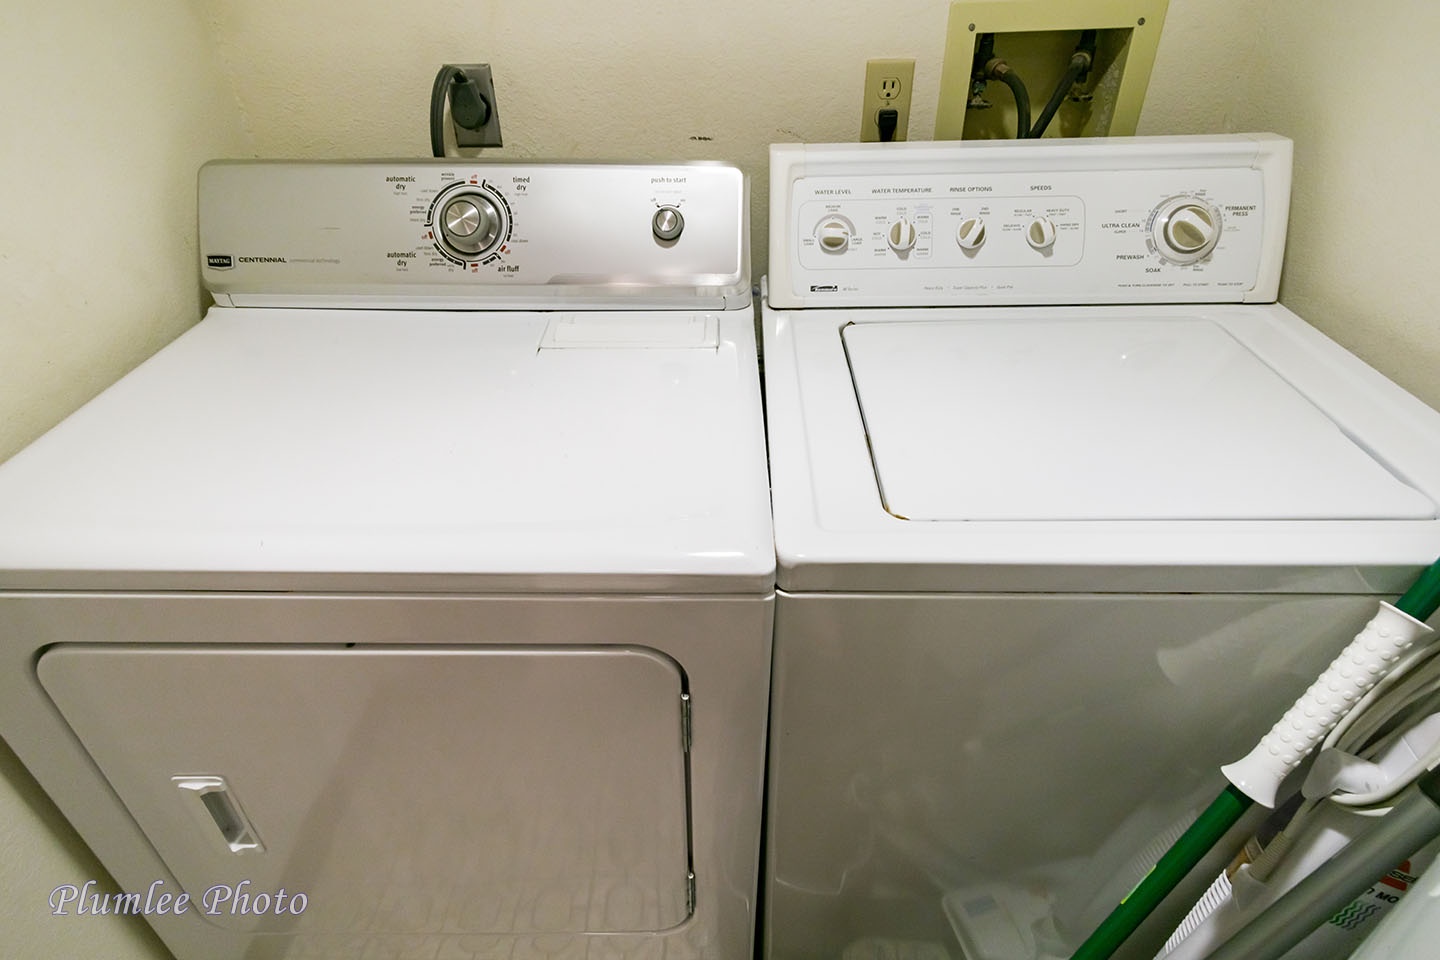 Ensuite washer and dryer.